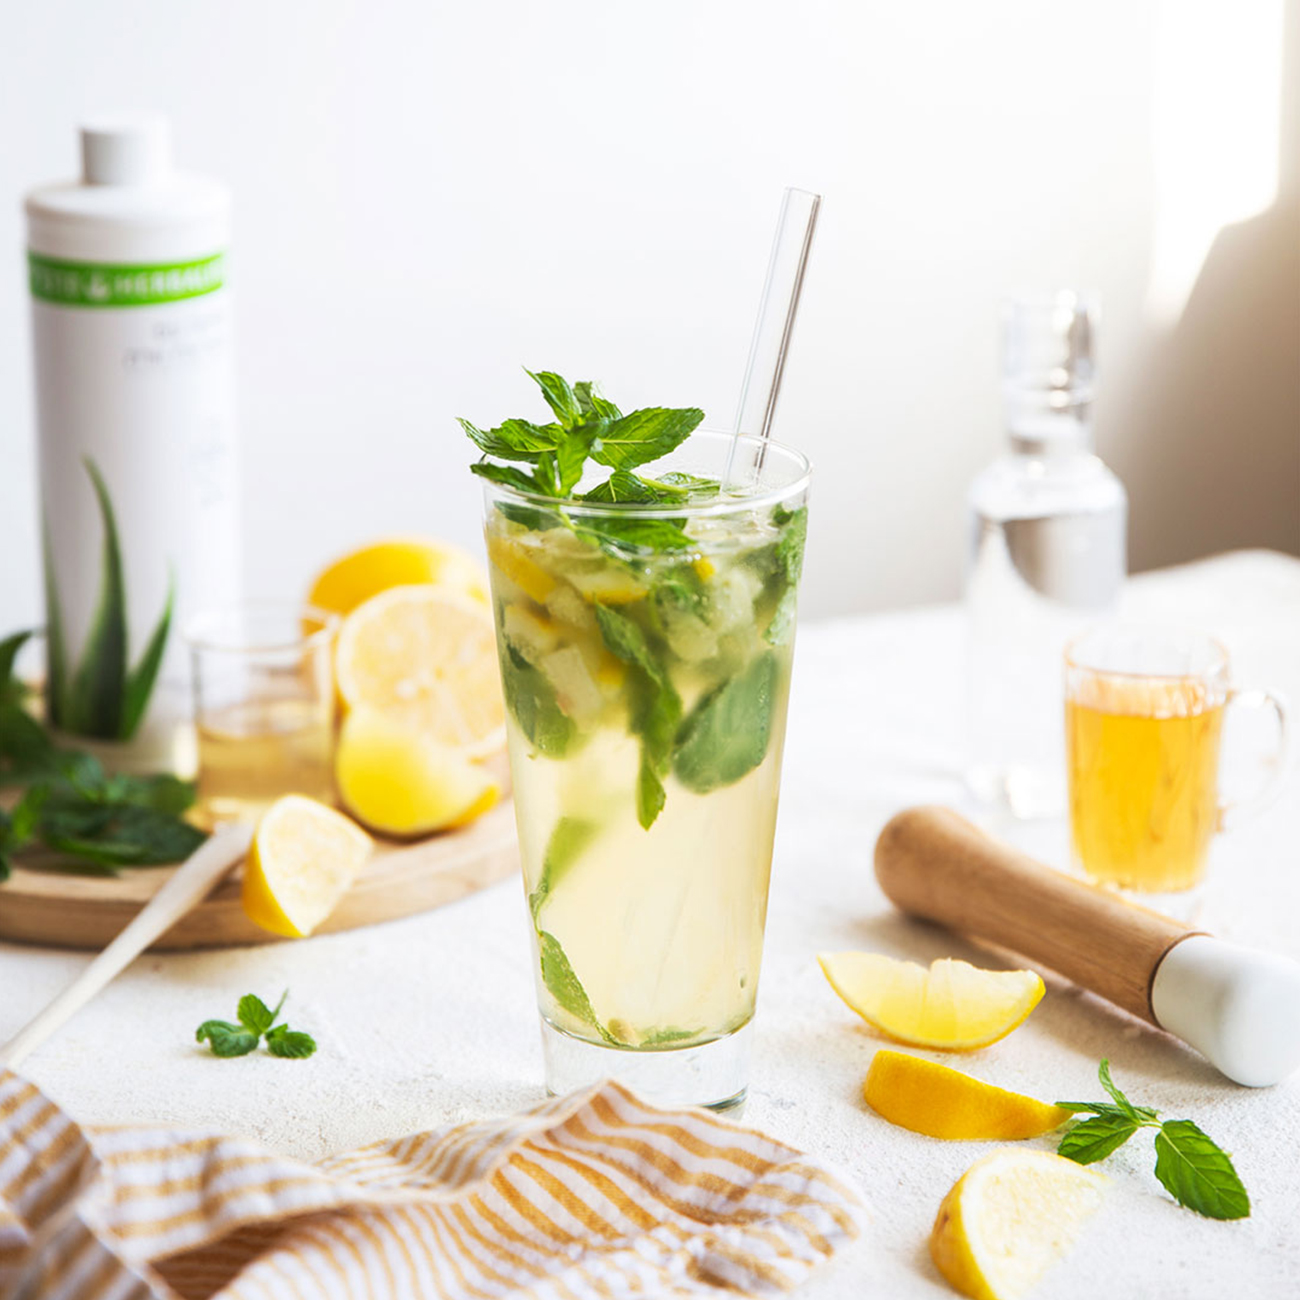 herbalife nutrition refreshing glass of aloemax drink with added lemon and mint